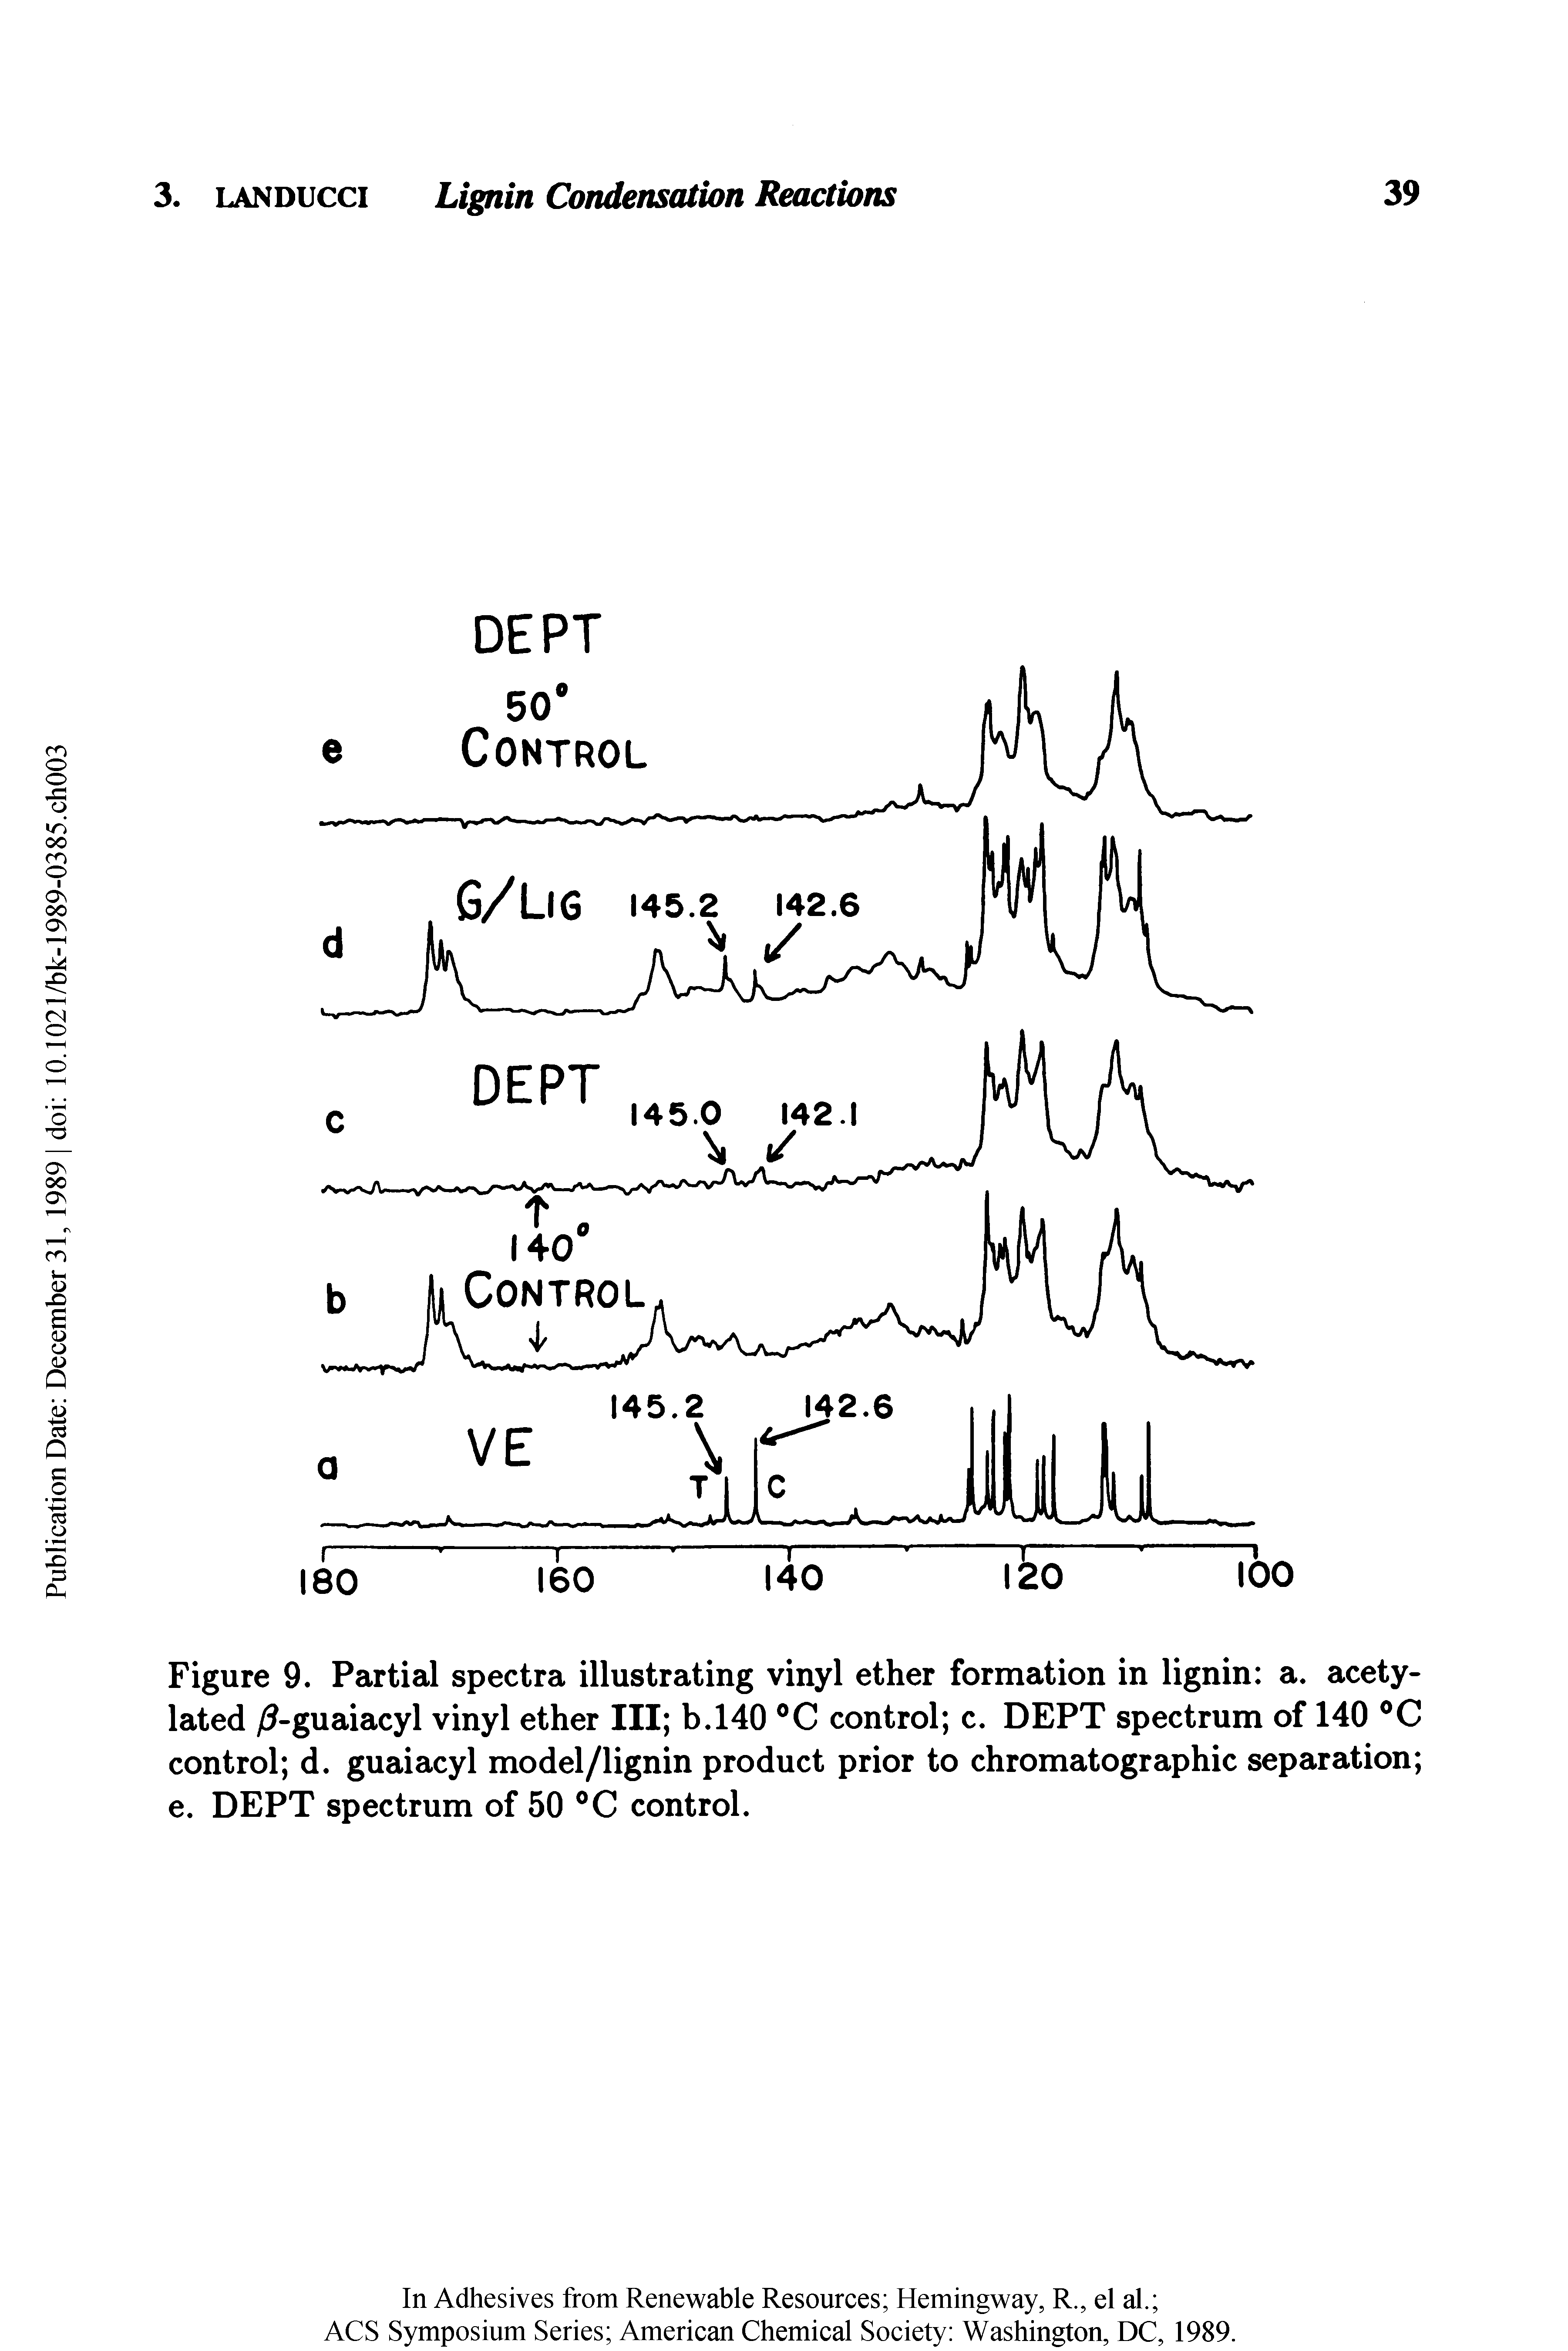 Figure 9. Partial spectra illustrating vinyl ether formation in lignin a. acety-lated / -guaiacyl vinyl ether III b.140 °C control c. DEPT spectrum of 140 °C control d. guaiacyl model/lignin product prior to chromatographic separation e. DEPT spectrum of 50 °C control.